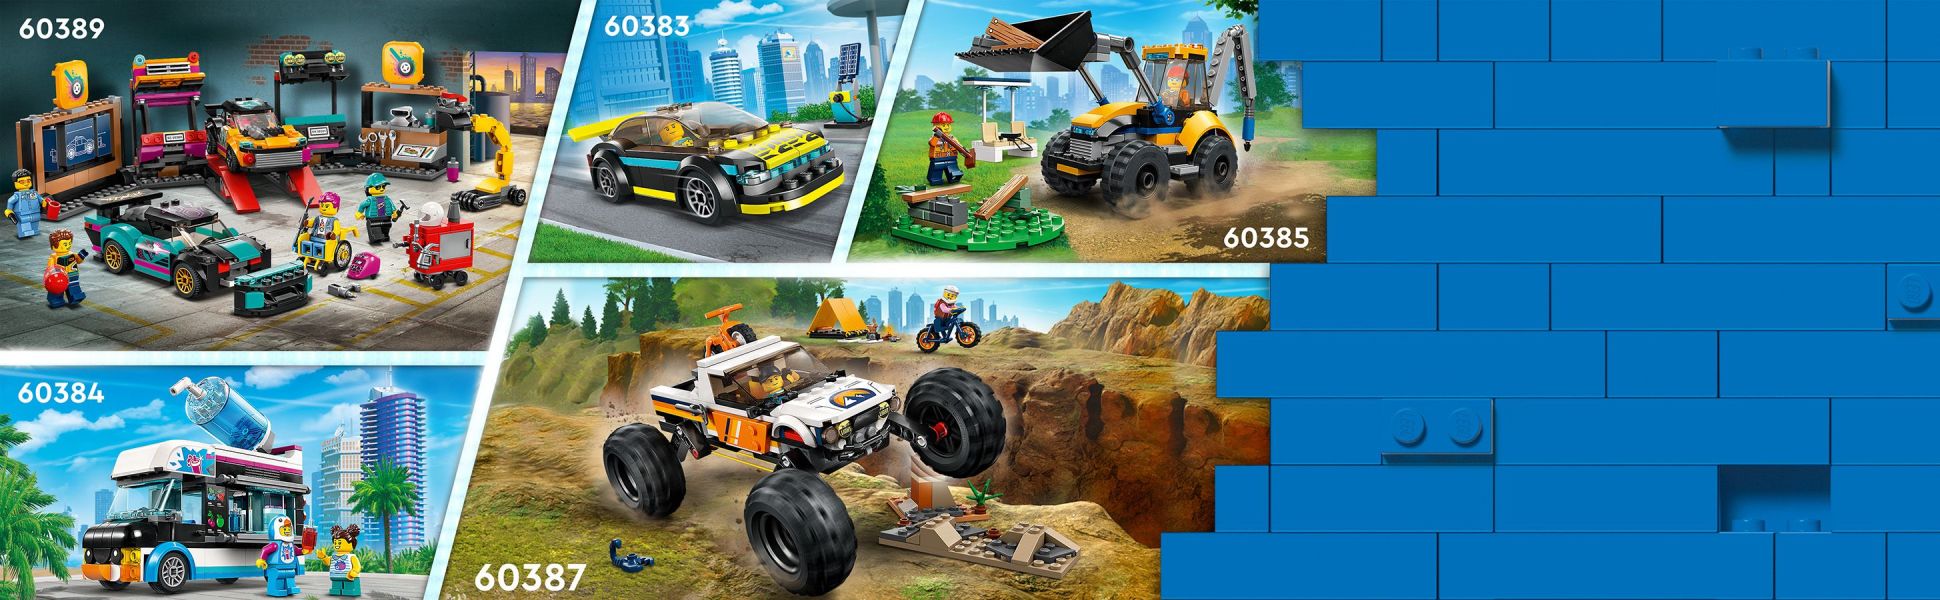 LEGO City 4x4 Mountain Toy Working Vehicle and Minifigures, Off-Roader Adventures Camping Monster Bikes, 60387 Including Toy - Style Ages Car Truck for Building 2 Set with Kids 6+ Suspension